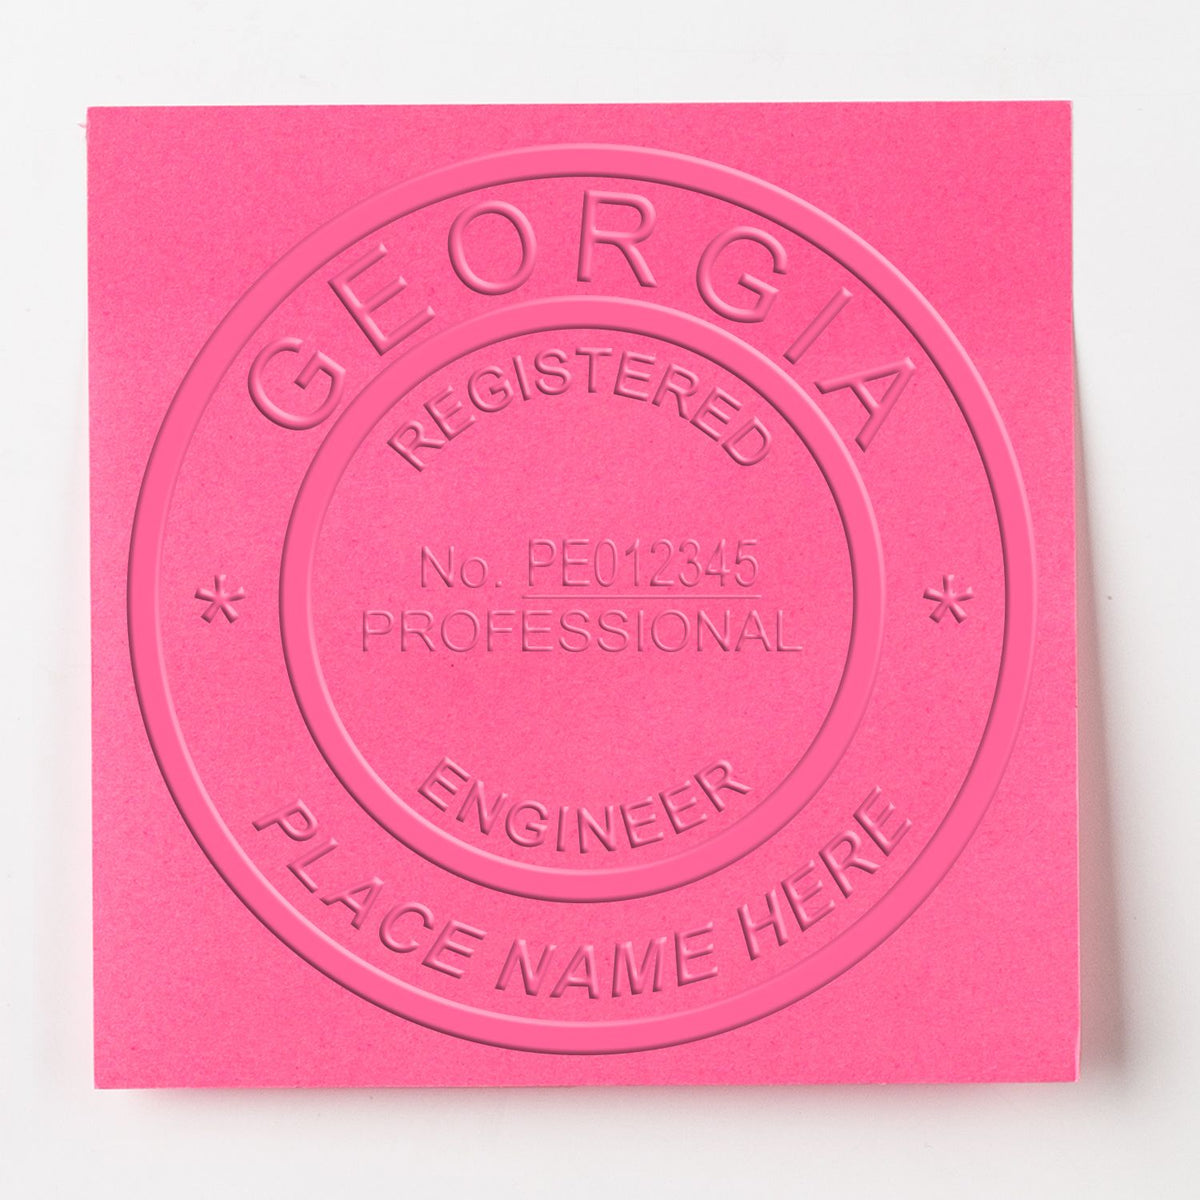 An alternative view of the Hybrid Georgia Engineer Seal stamped on a sheet of paper showing the image in use